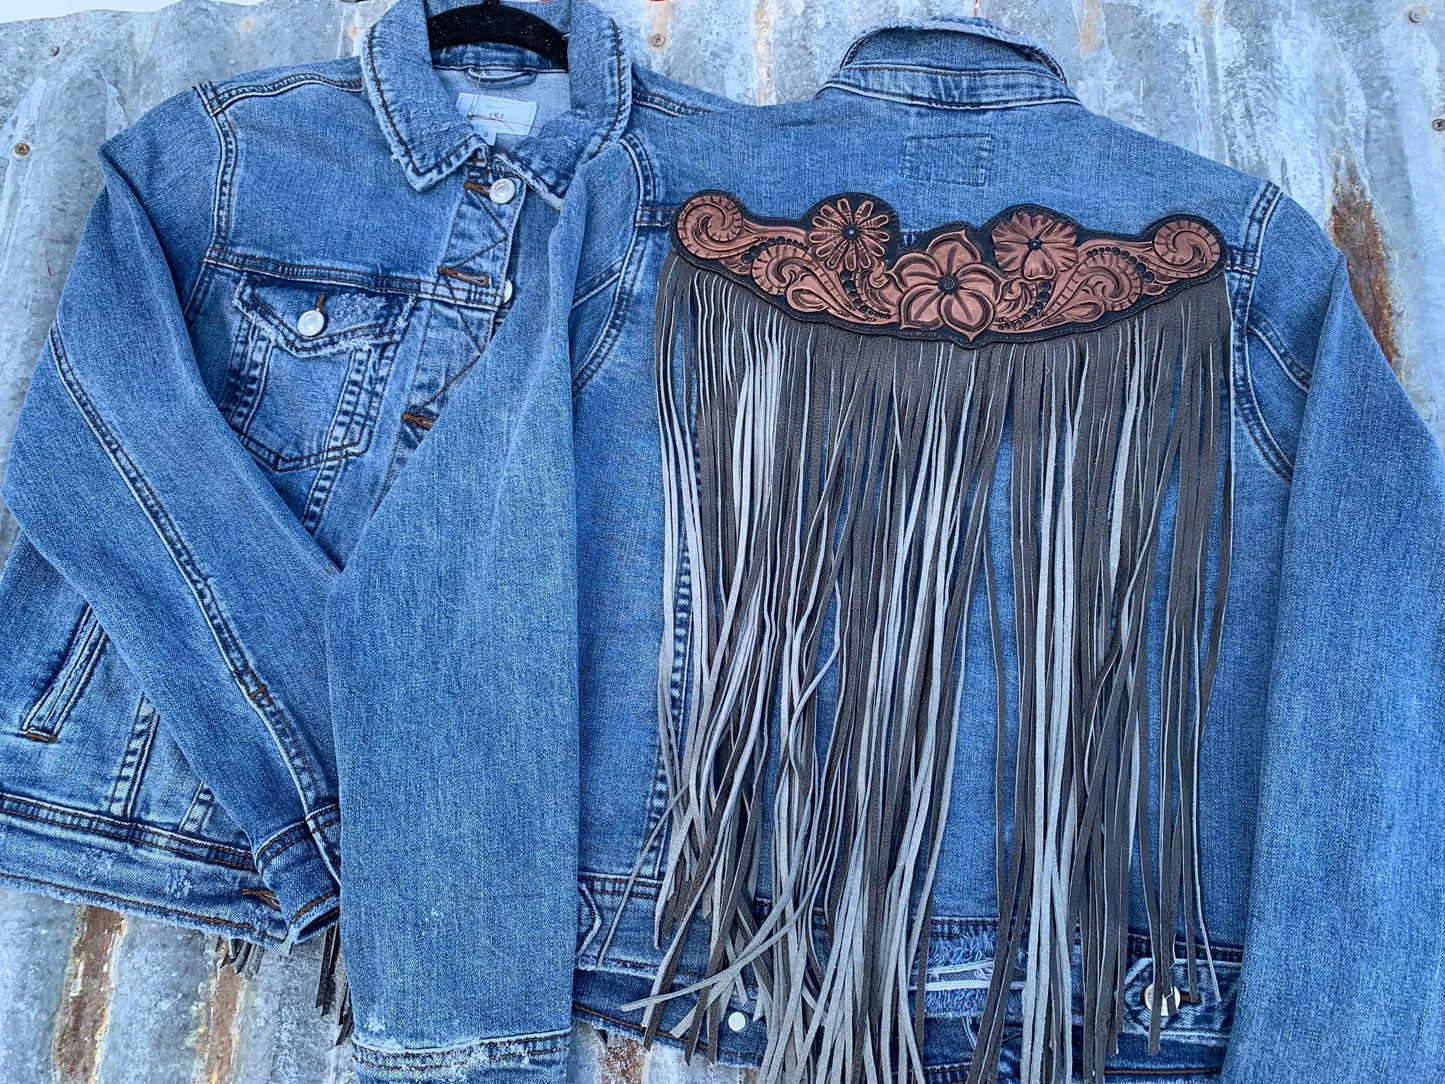 Handtooled Leather Denim Jacket in Black and Grey with Xtra Long Fringe The Rodeo Rose